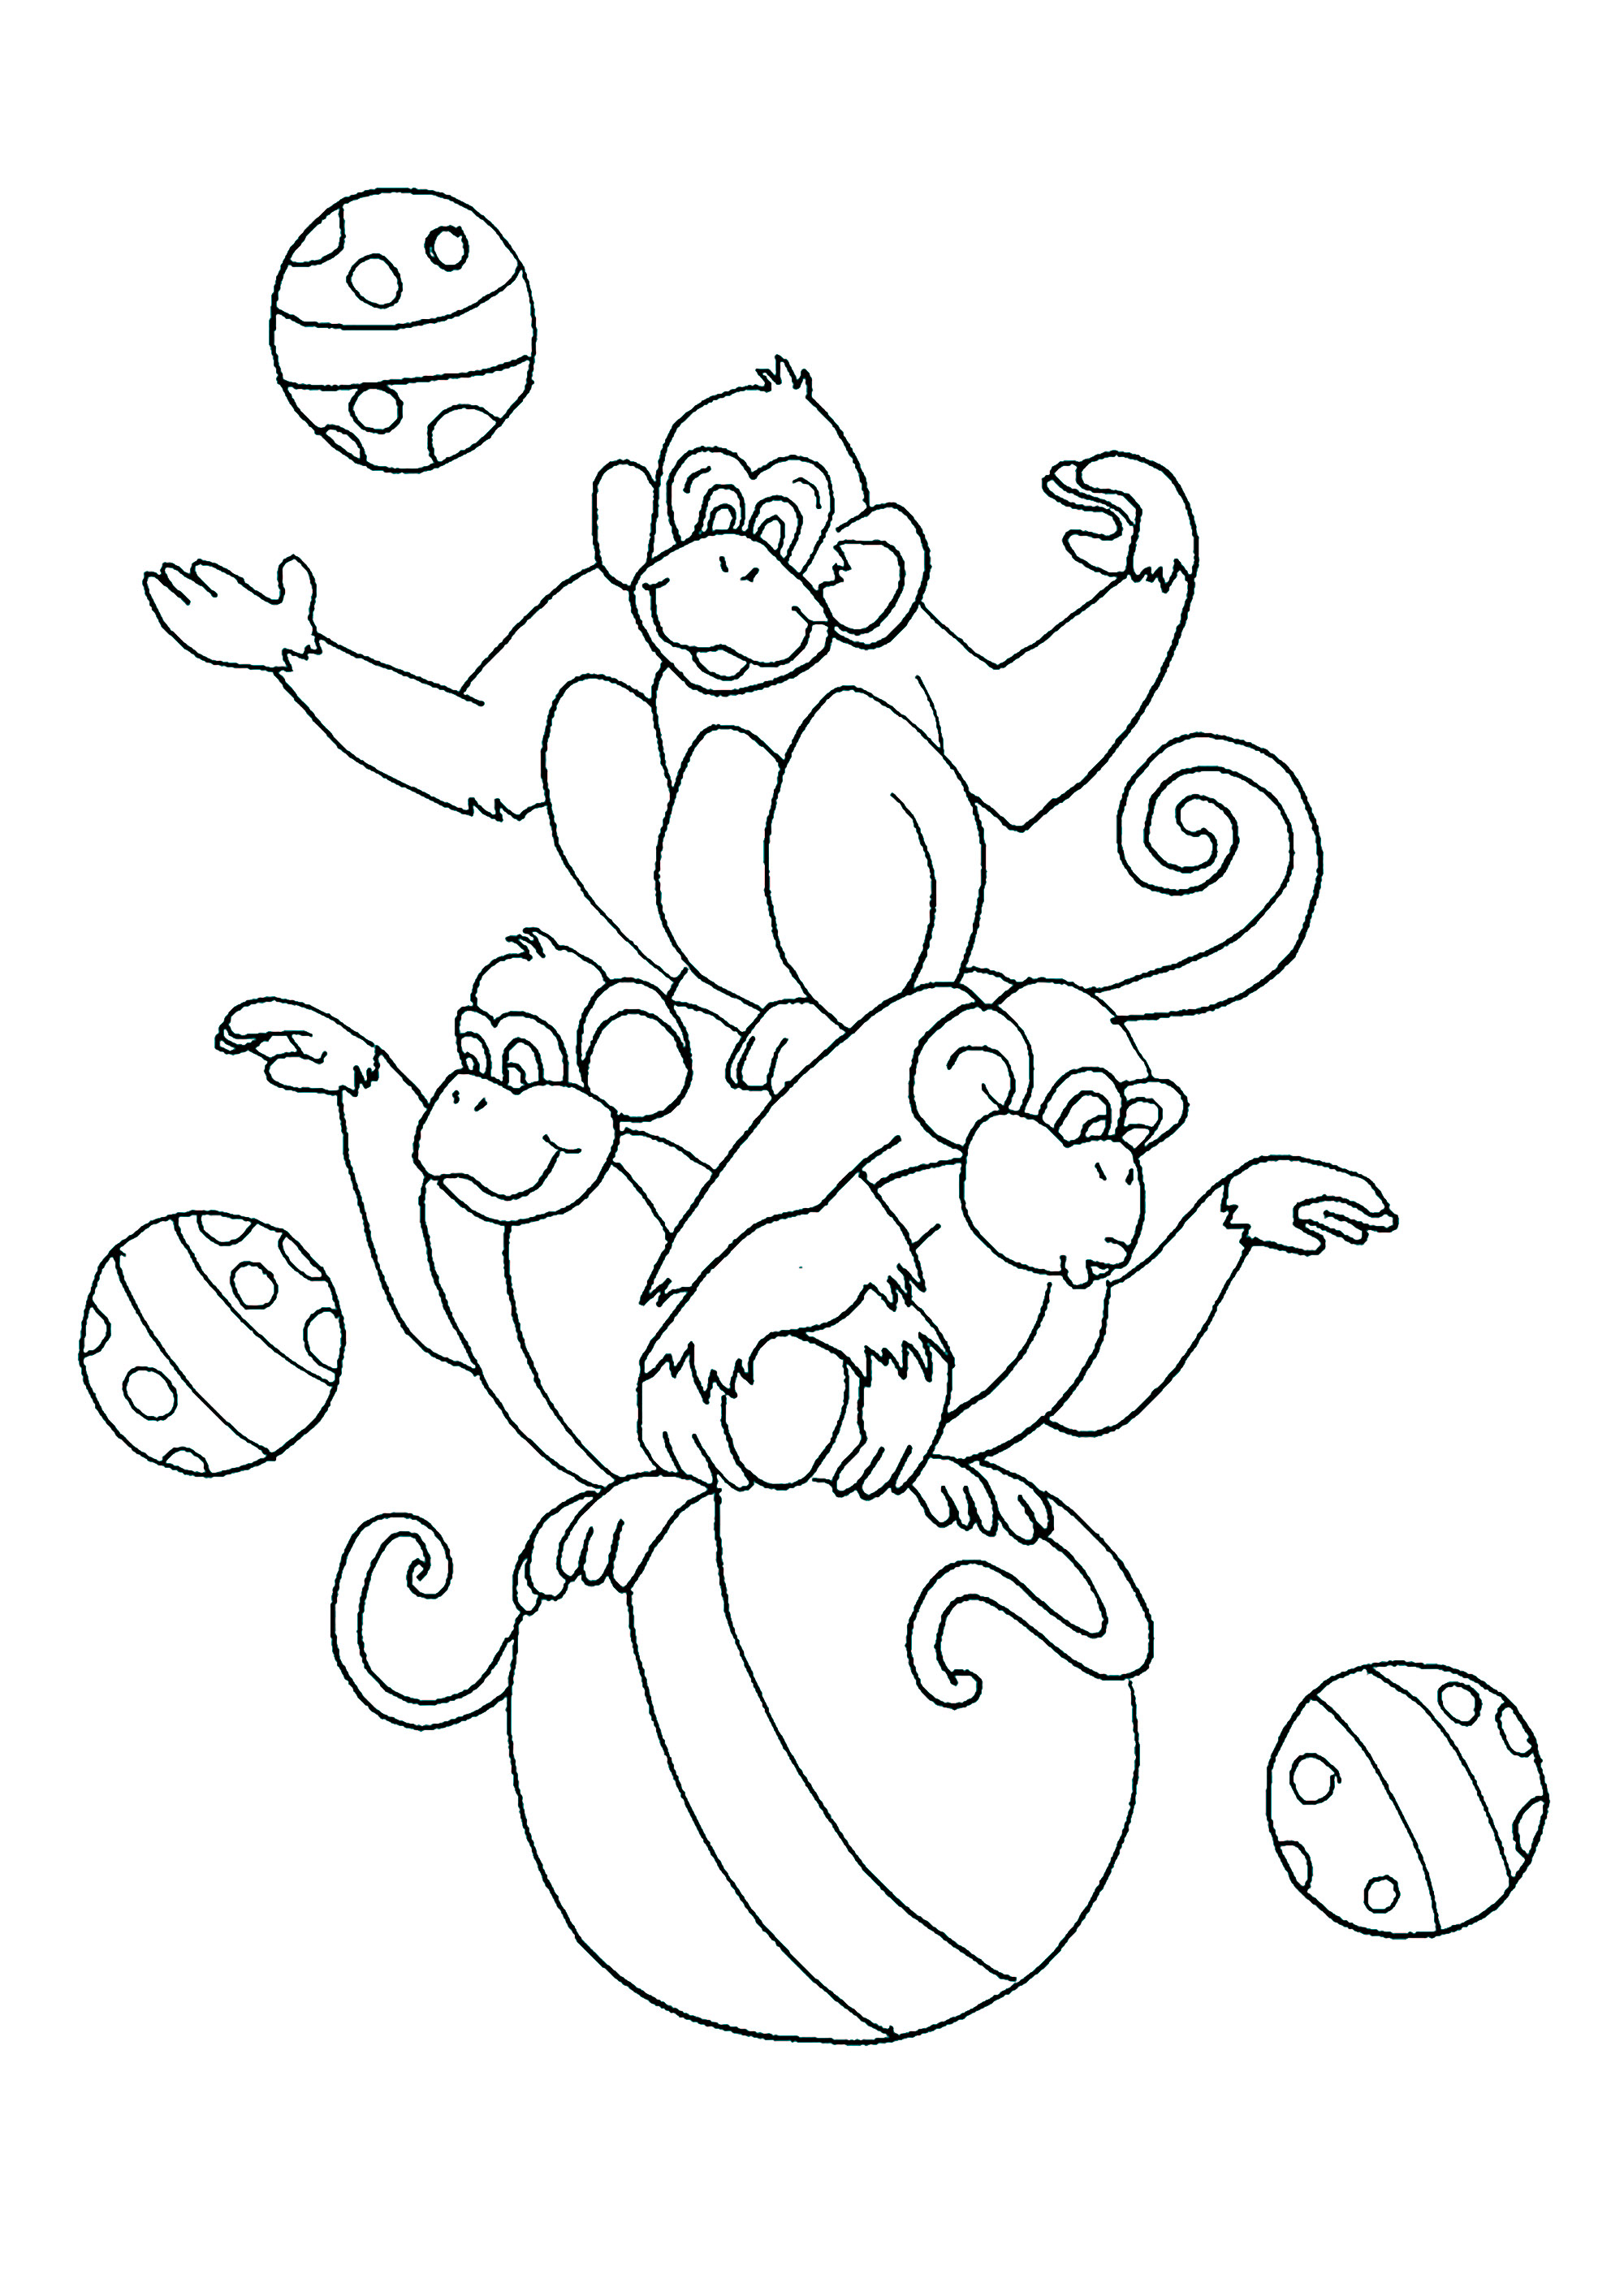 Circus monkeys playing on a large ball. Color these three monkeys and all their balloons